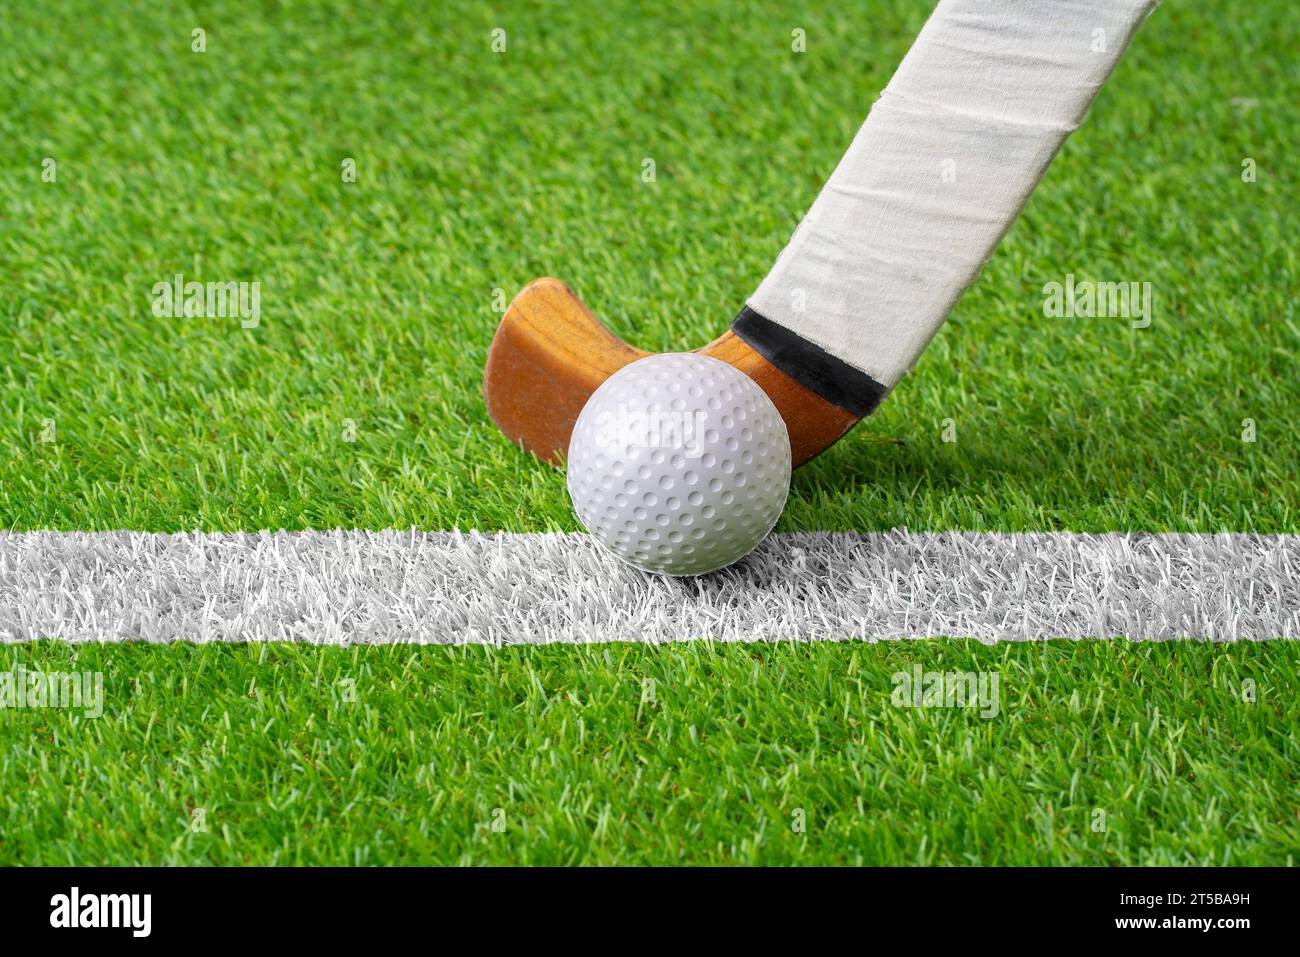 Field with ball and a stick for hockey, fitness and training in stadium. Closeup, ground and gear or equipment for a competition, game or tournament a Stock Photo